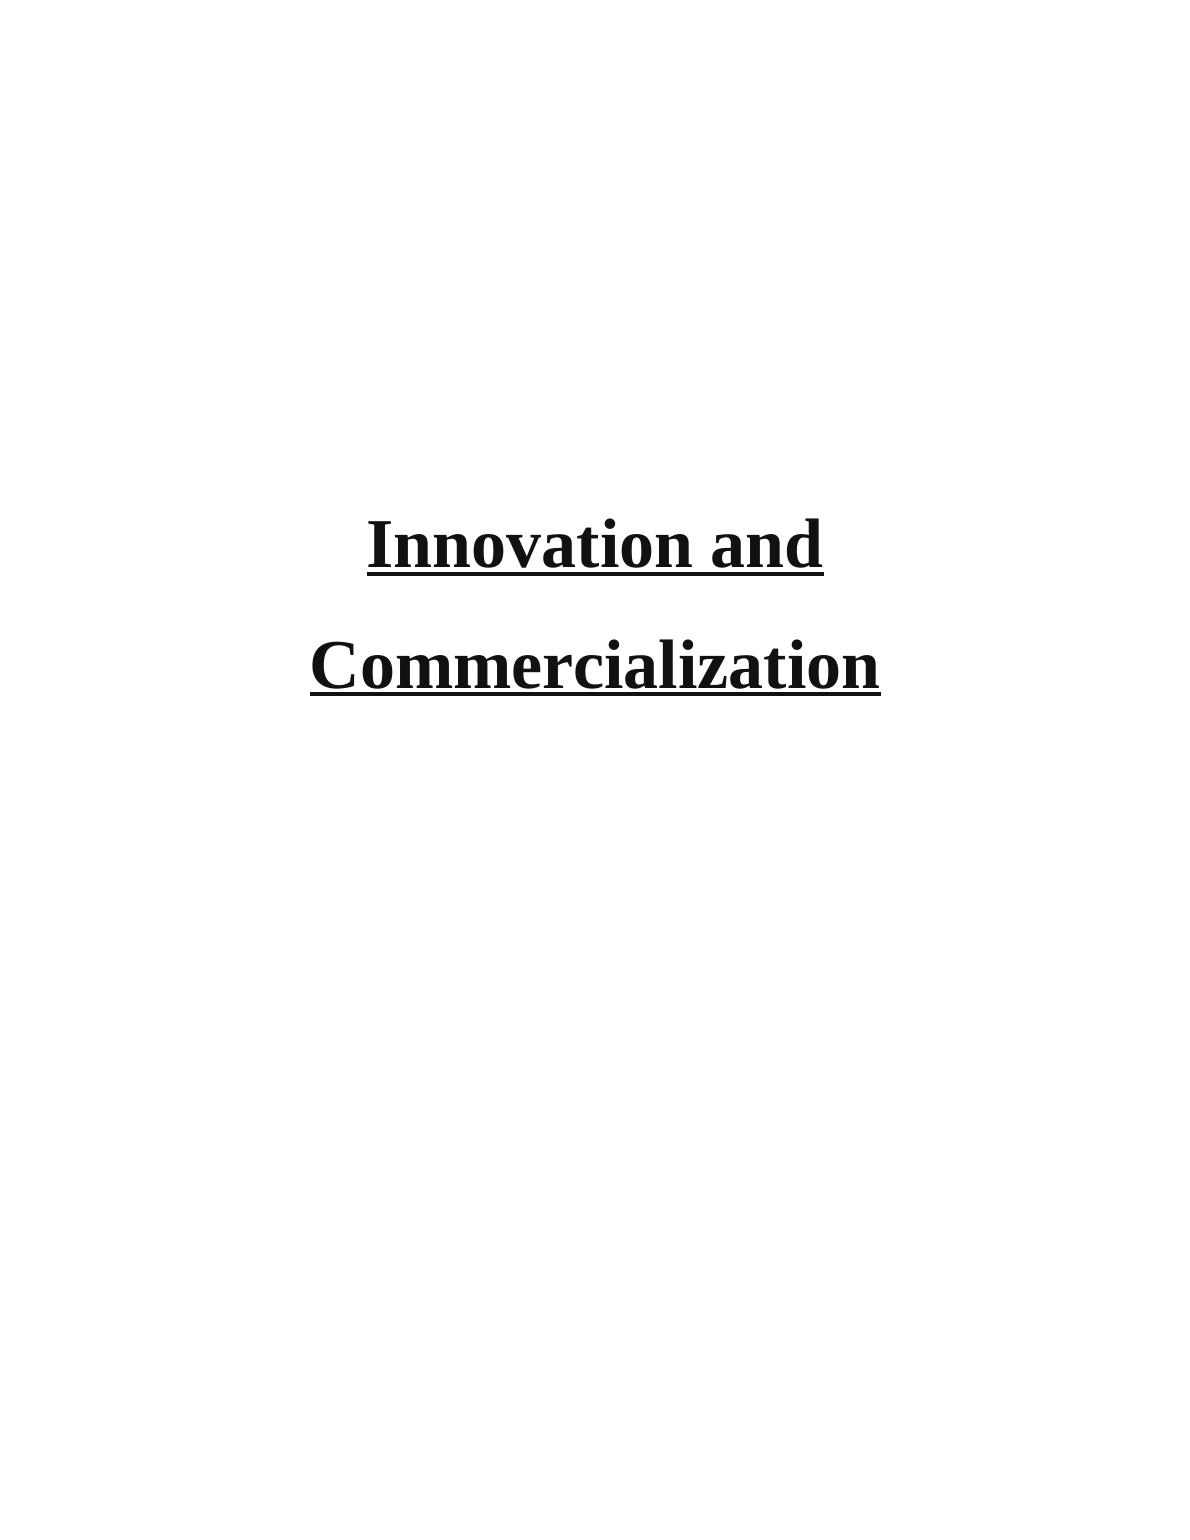 Innovation and Commercialization Importance & Value_1